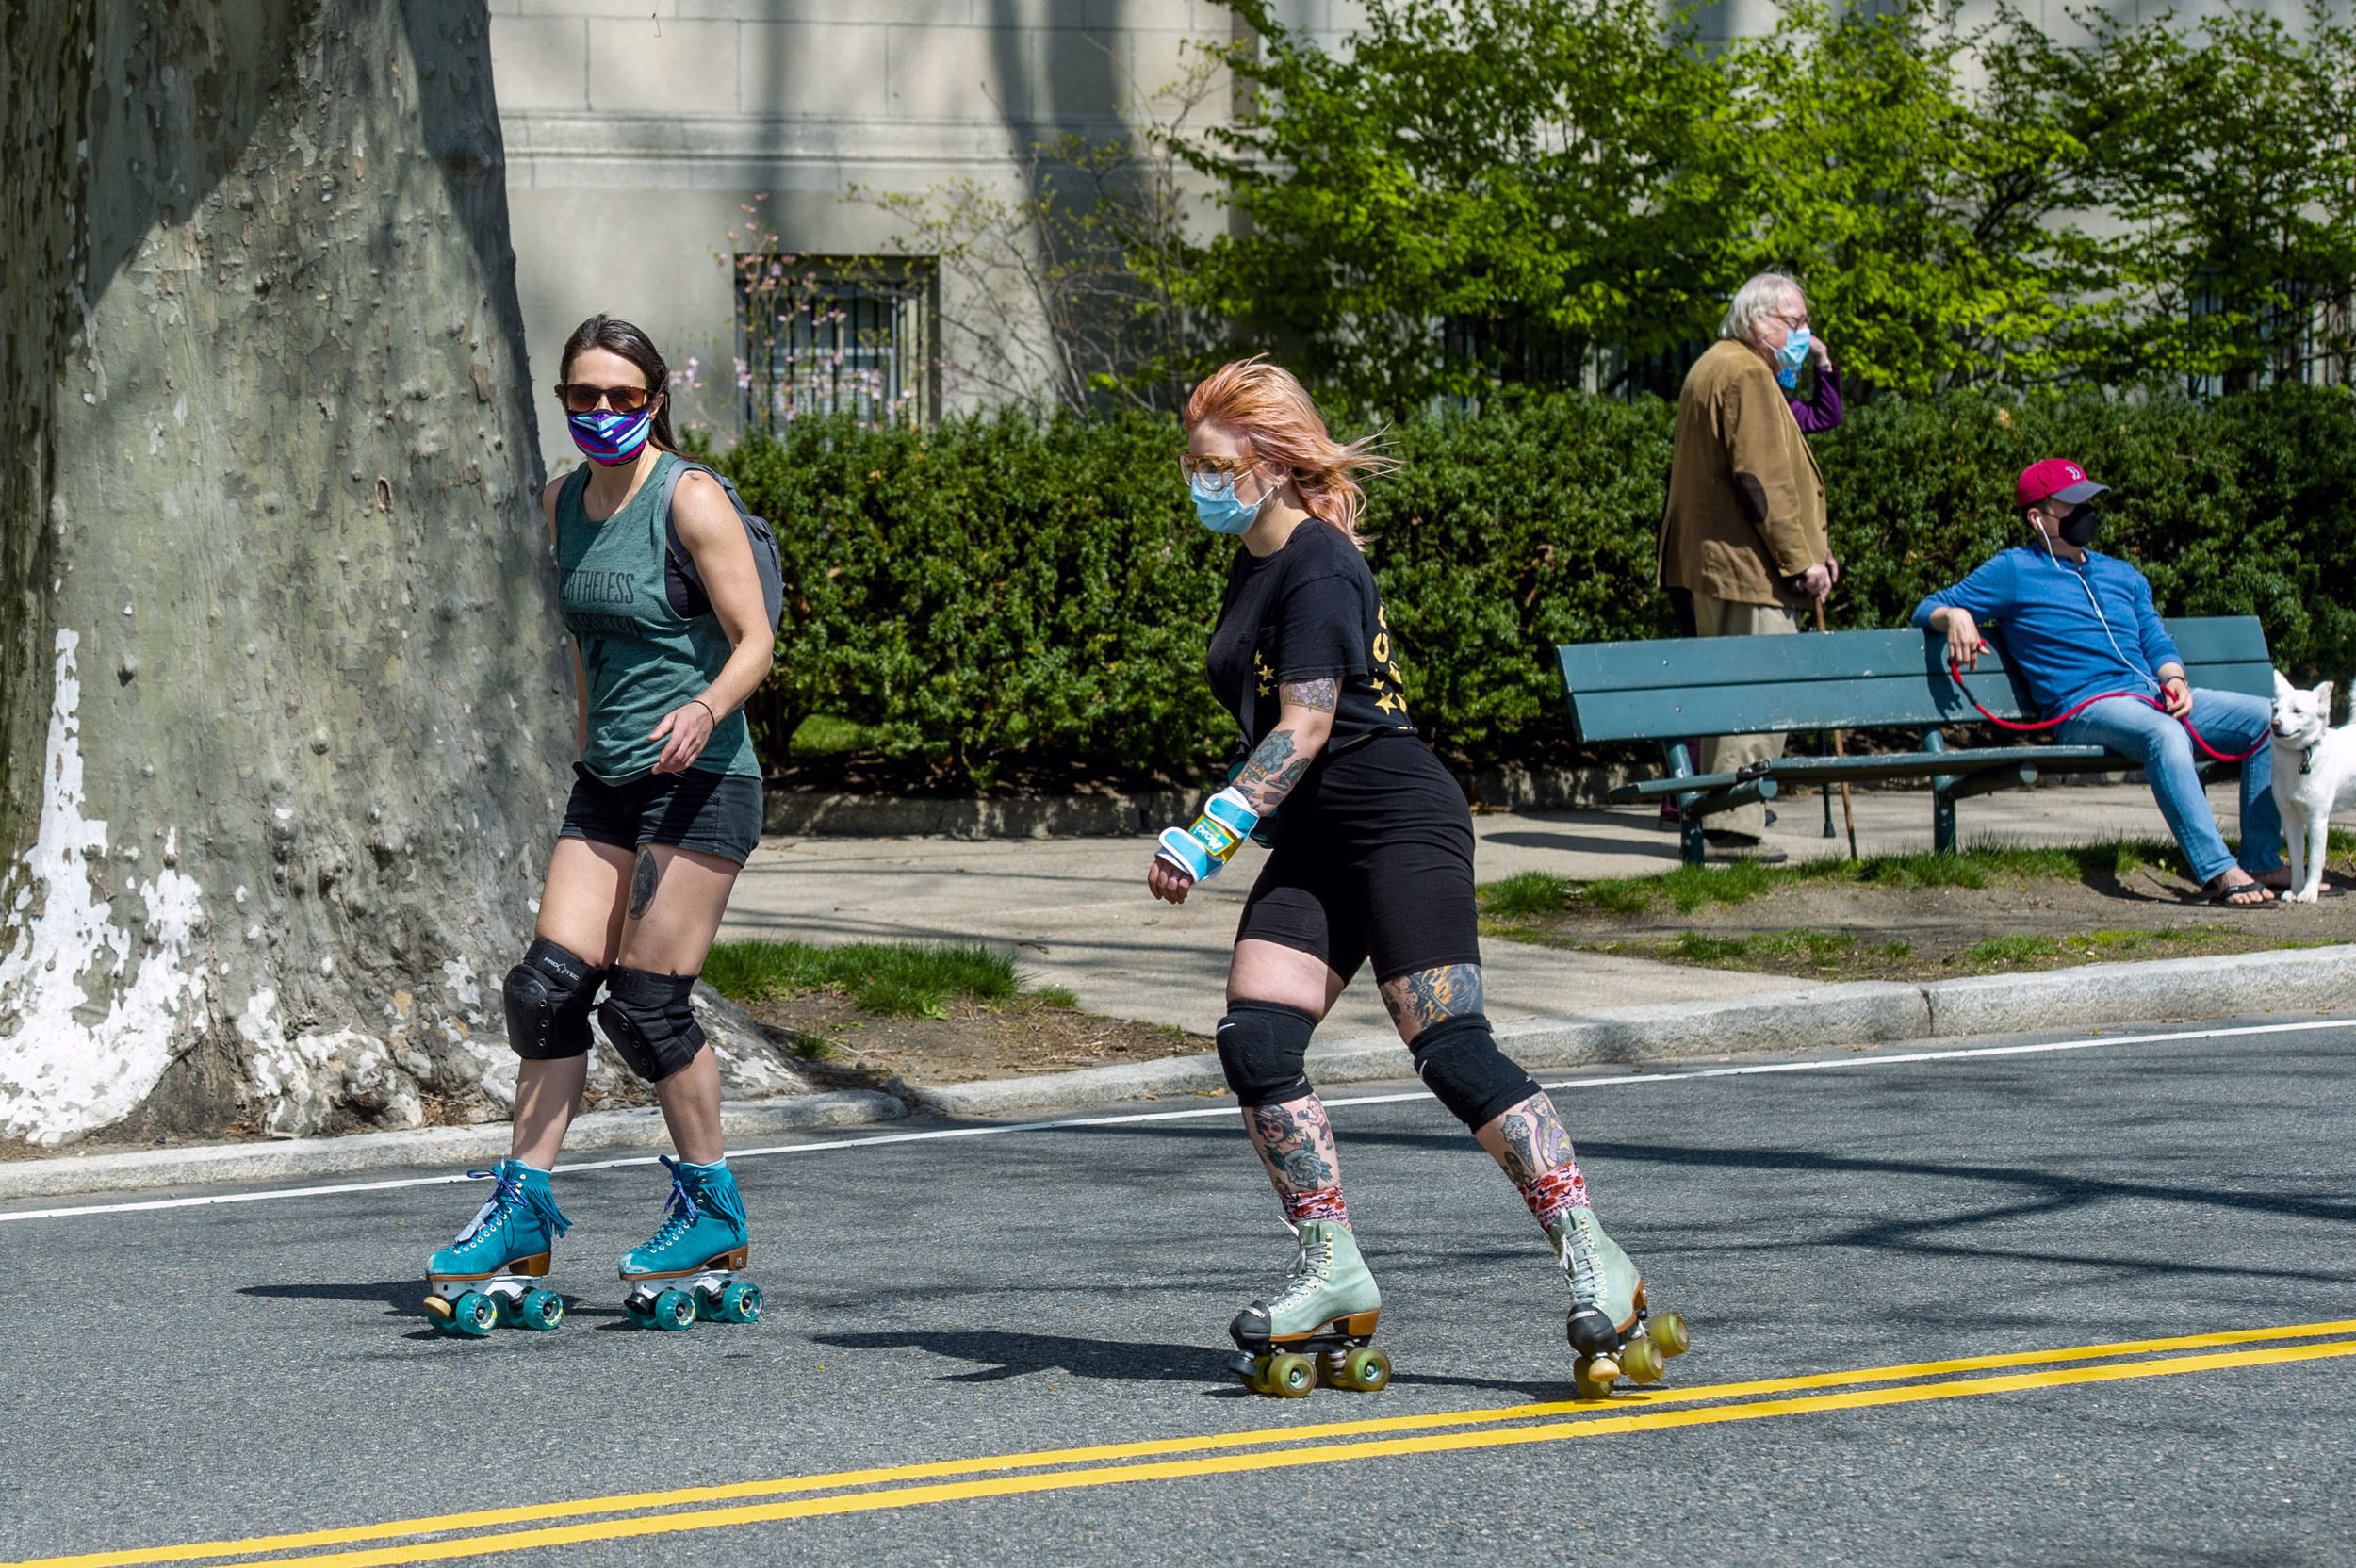 A couple of Rollerbladers glide past a walker and a man sitting on a bench with his dog.